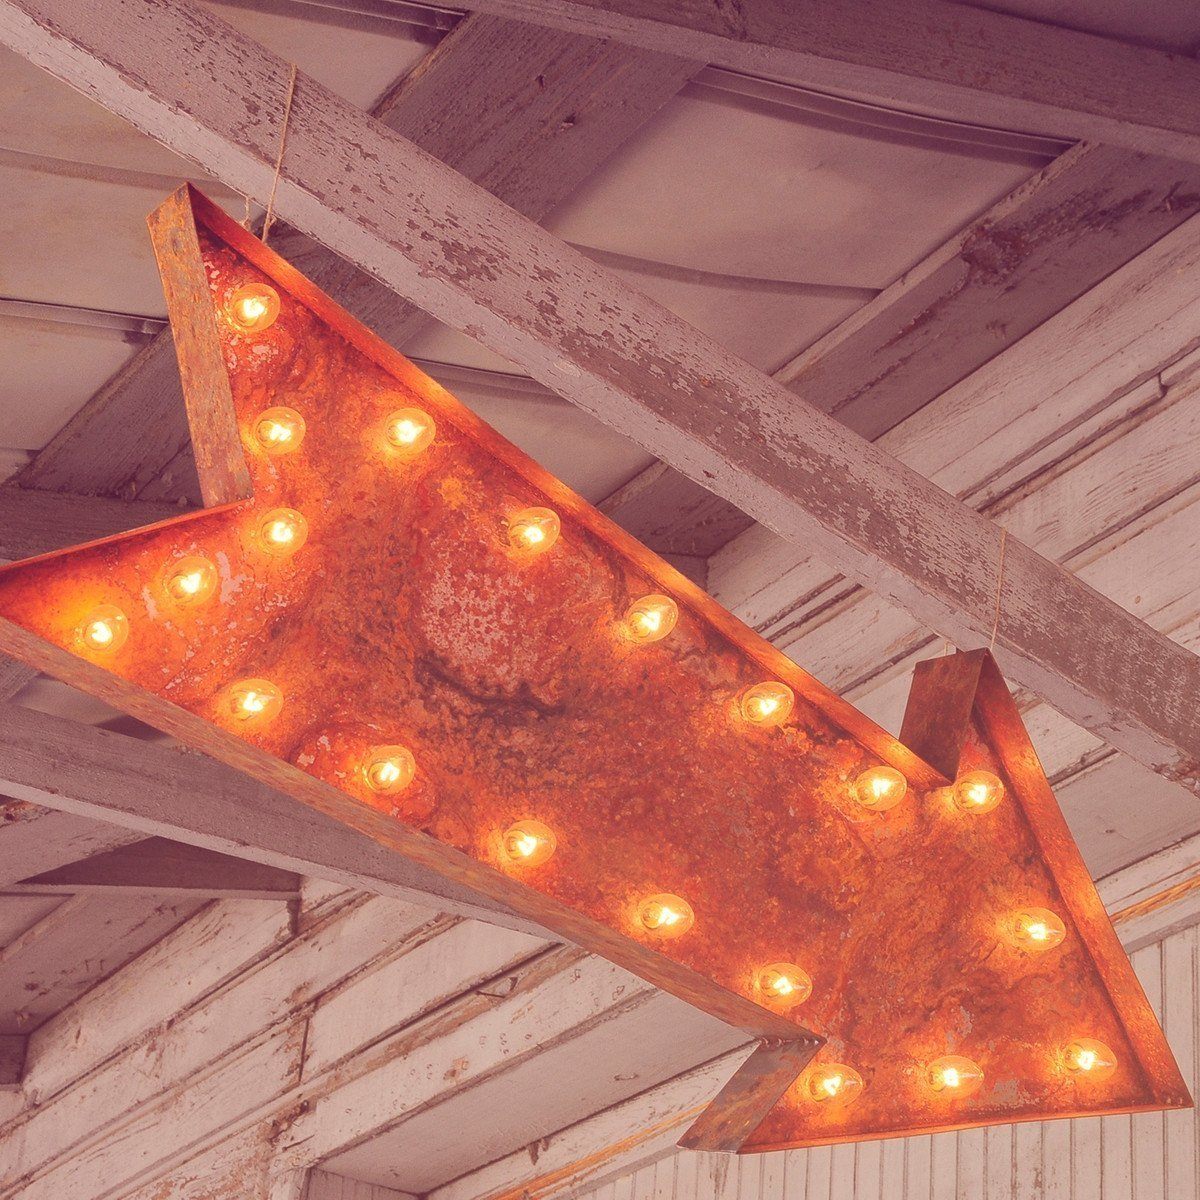 36” Large Arrow Vintage Marquee Sign with Lights (Rustic) - Buy Marquee  Lights Online - The Rusty Marquee